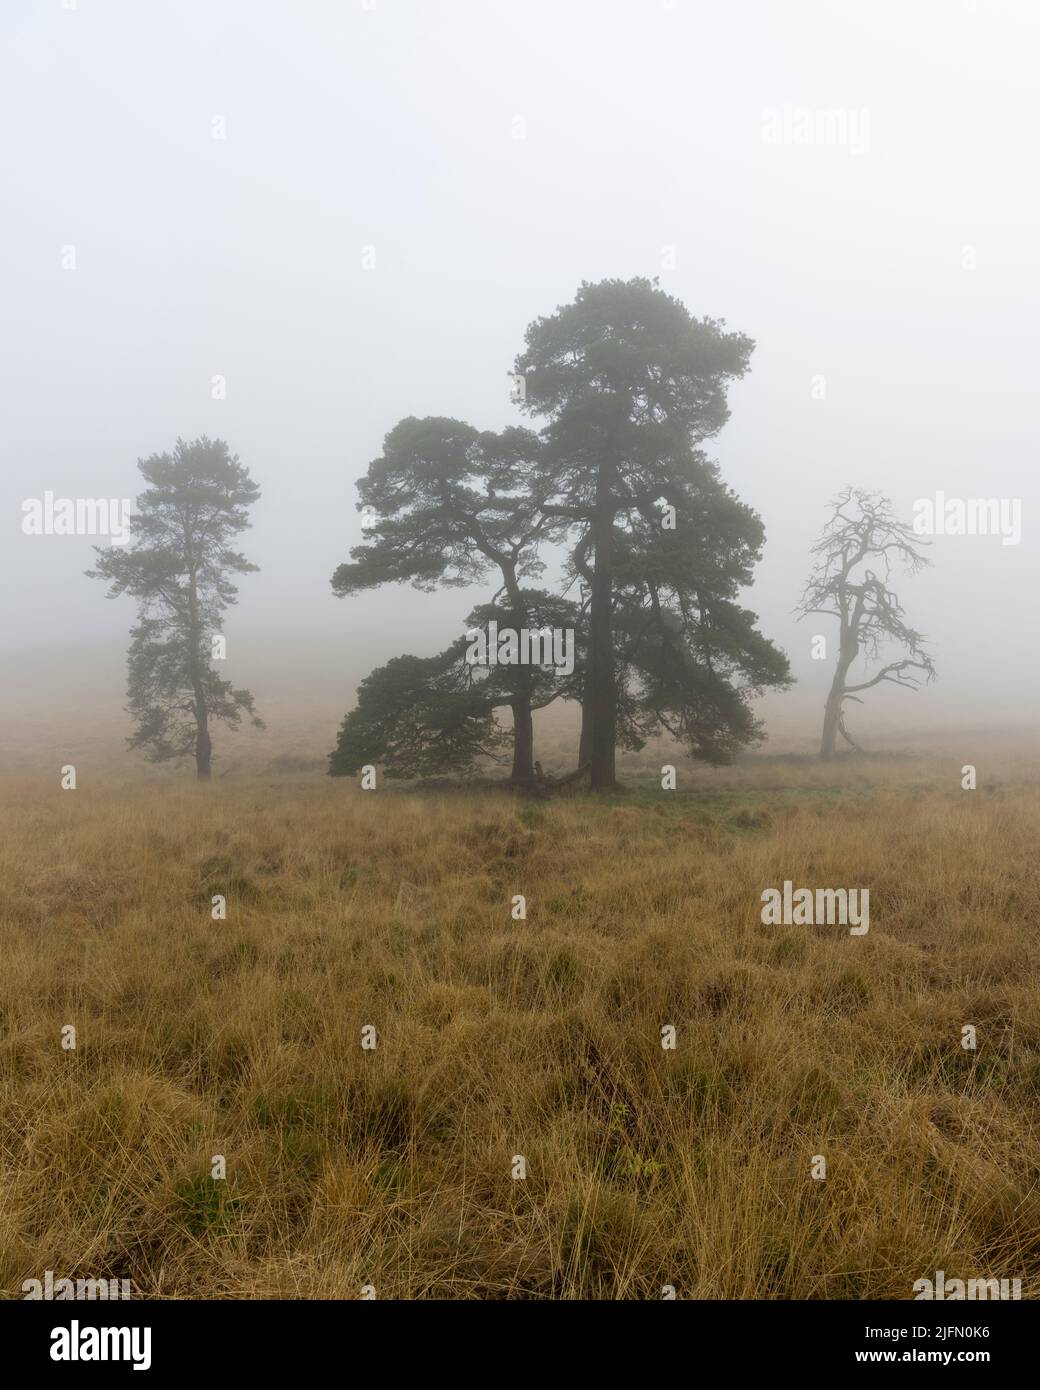 Scots pine trees in the mist at Priddy Mineries Nature Reserve in the Mendip Hills, Somerset, England. Stock Photo